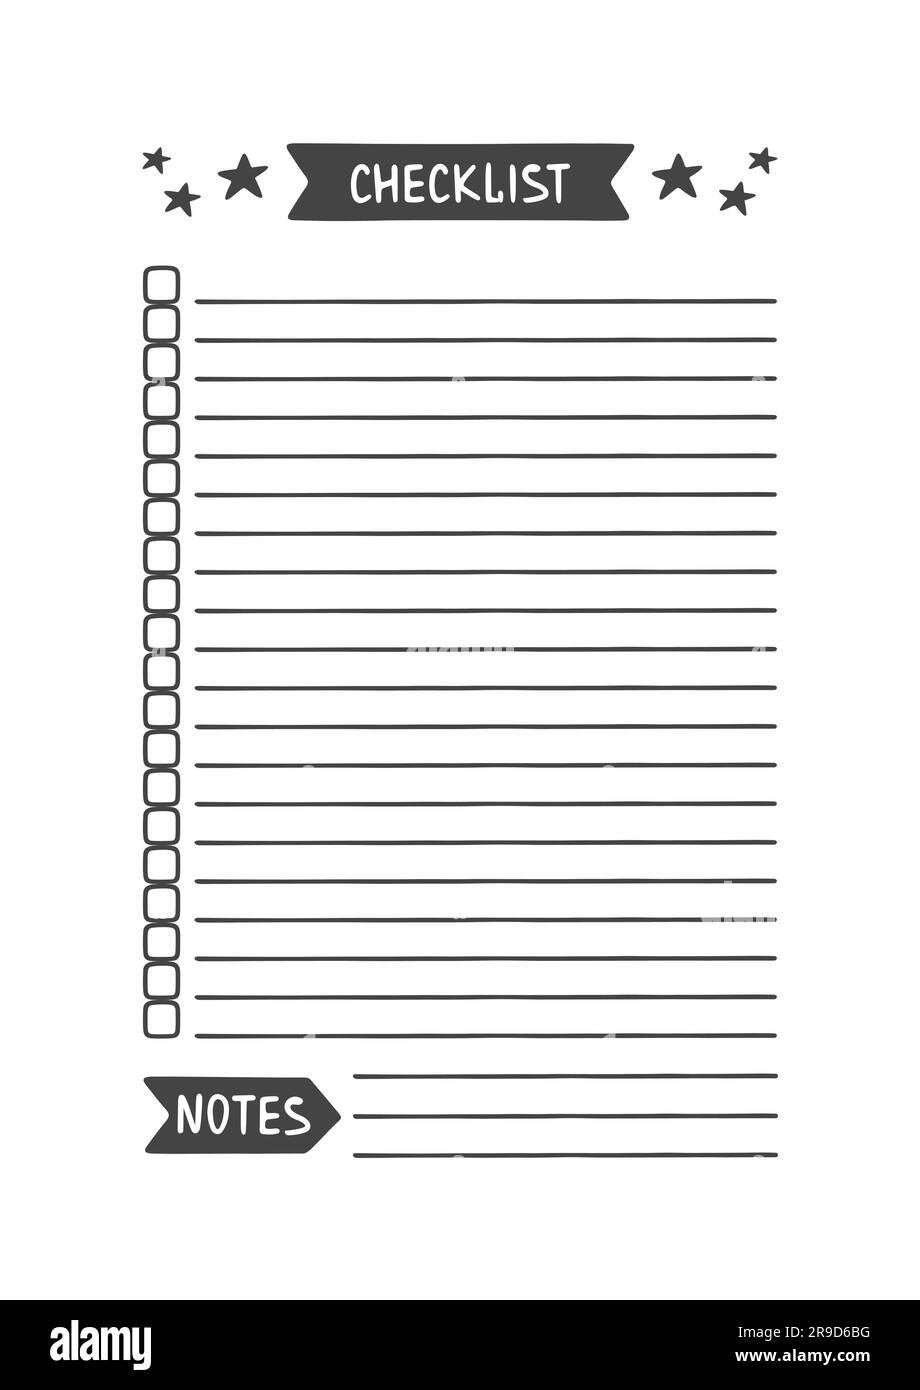 Checklist. Vector Template for Agenda, Planner and Other Stationery. Printable Organizer for Study, School or Work. Stock Vector